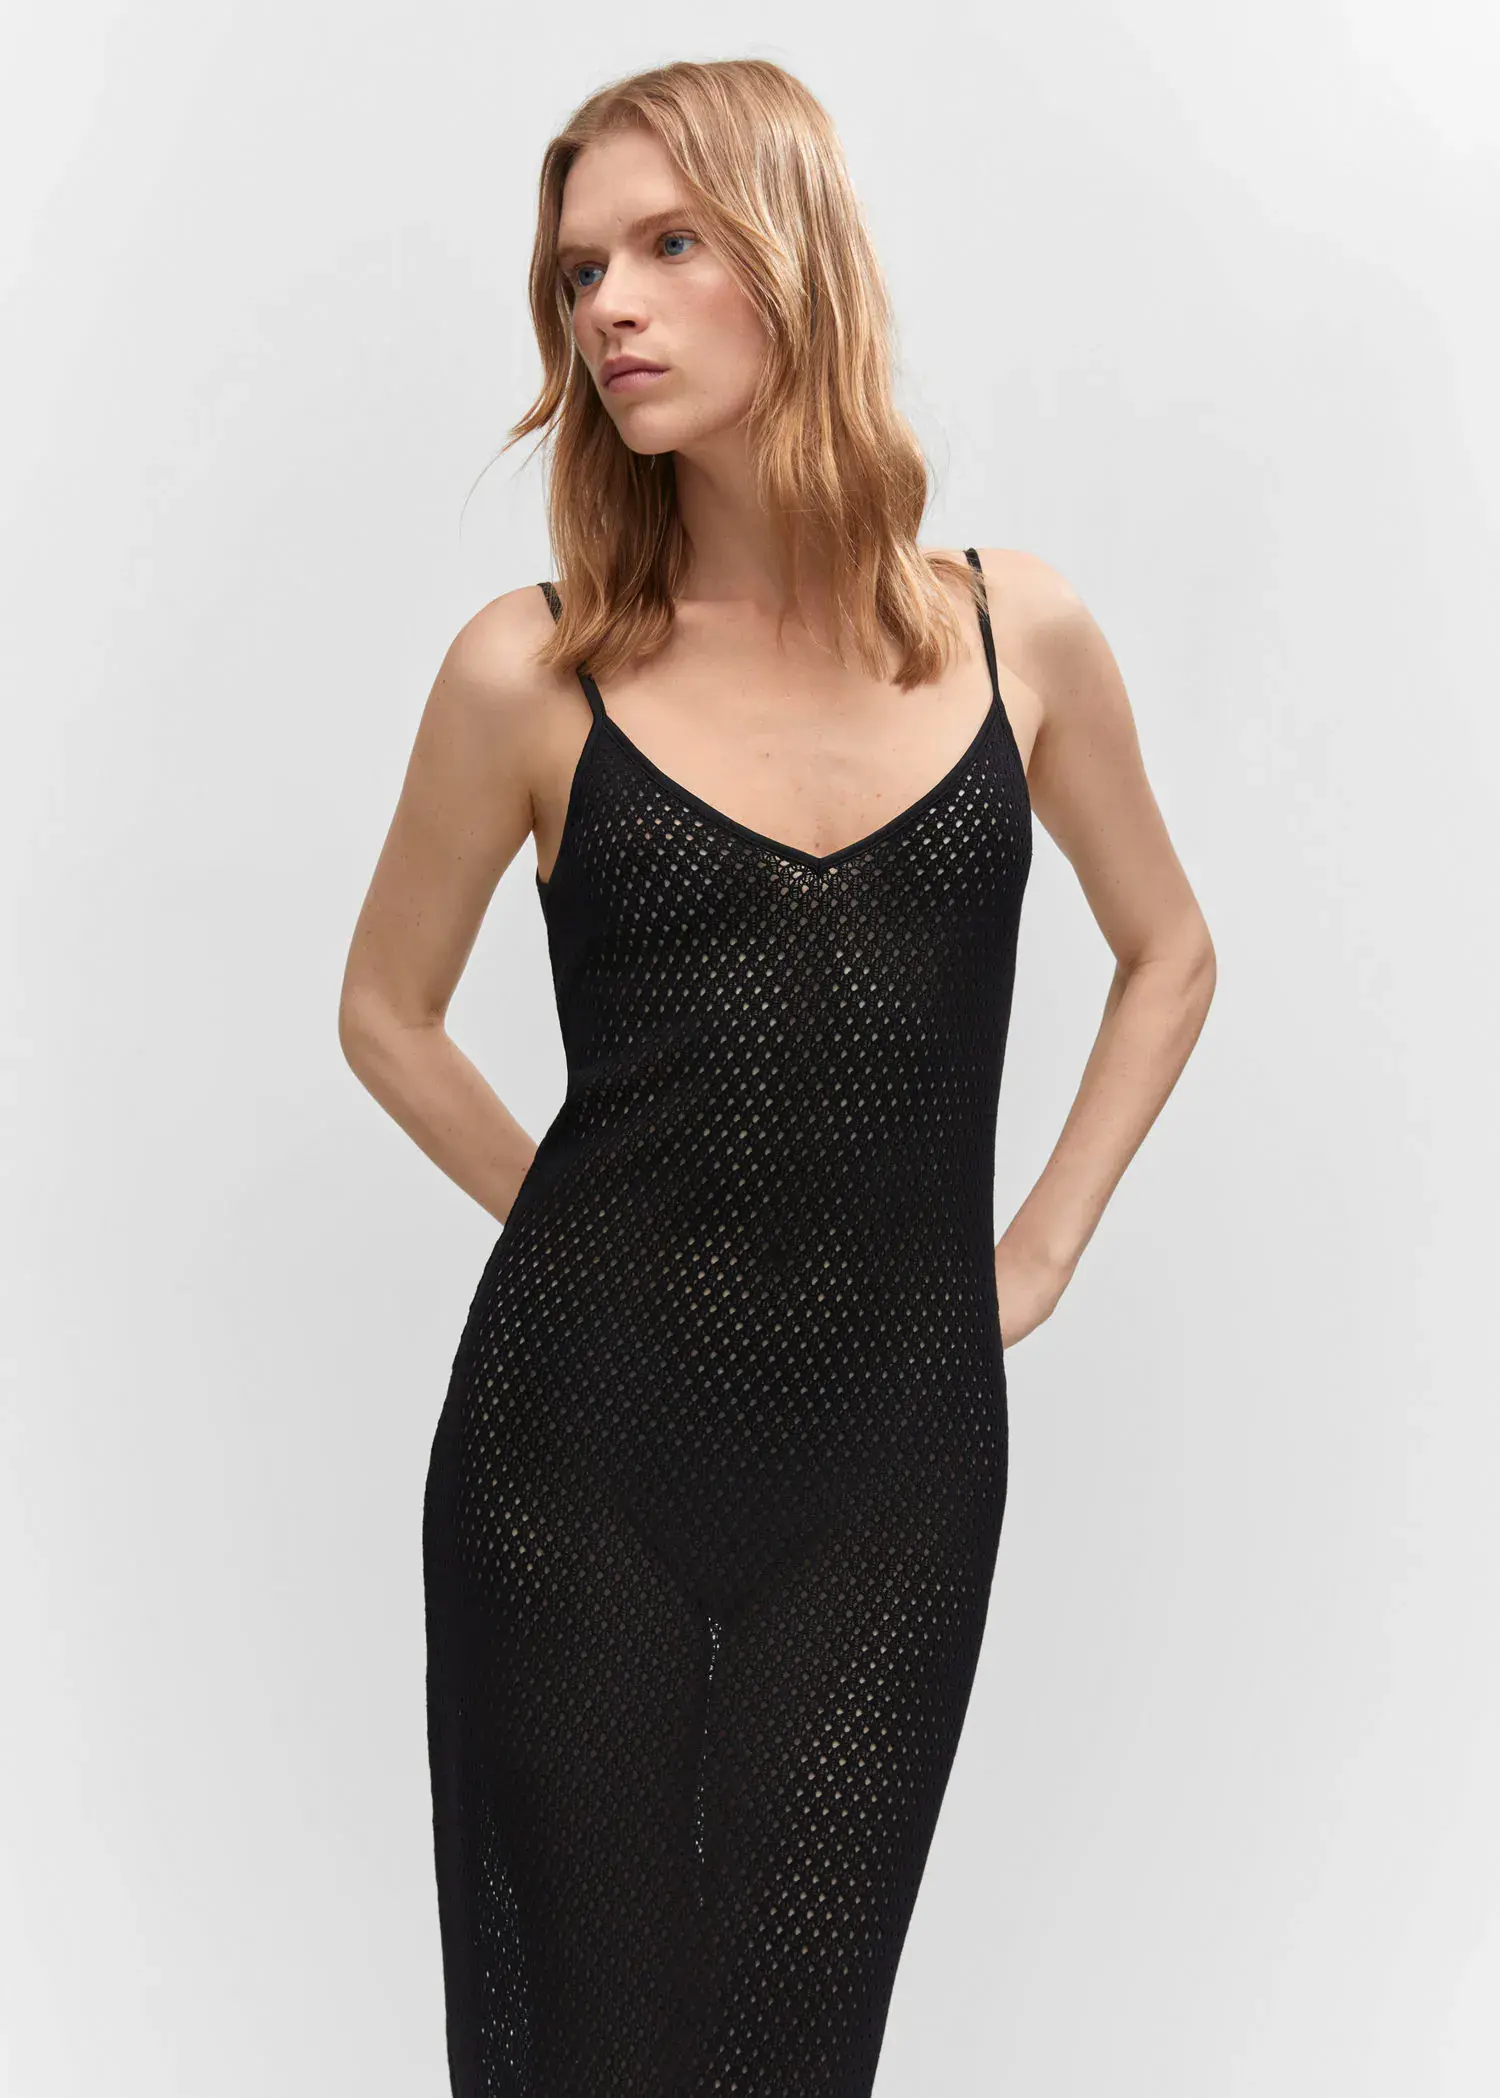 Mango Long openwork knitted dress. a woman in a black dress posing for a picture. 